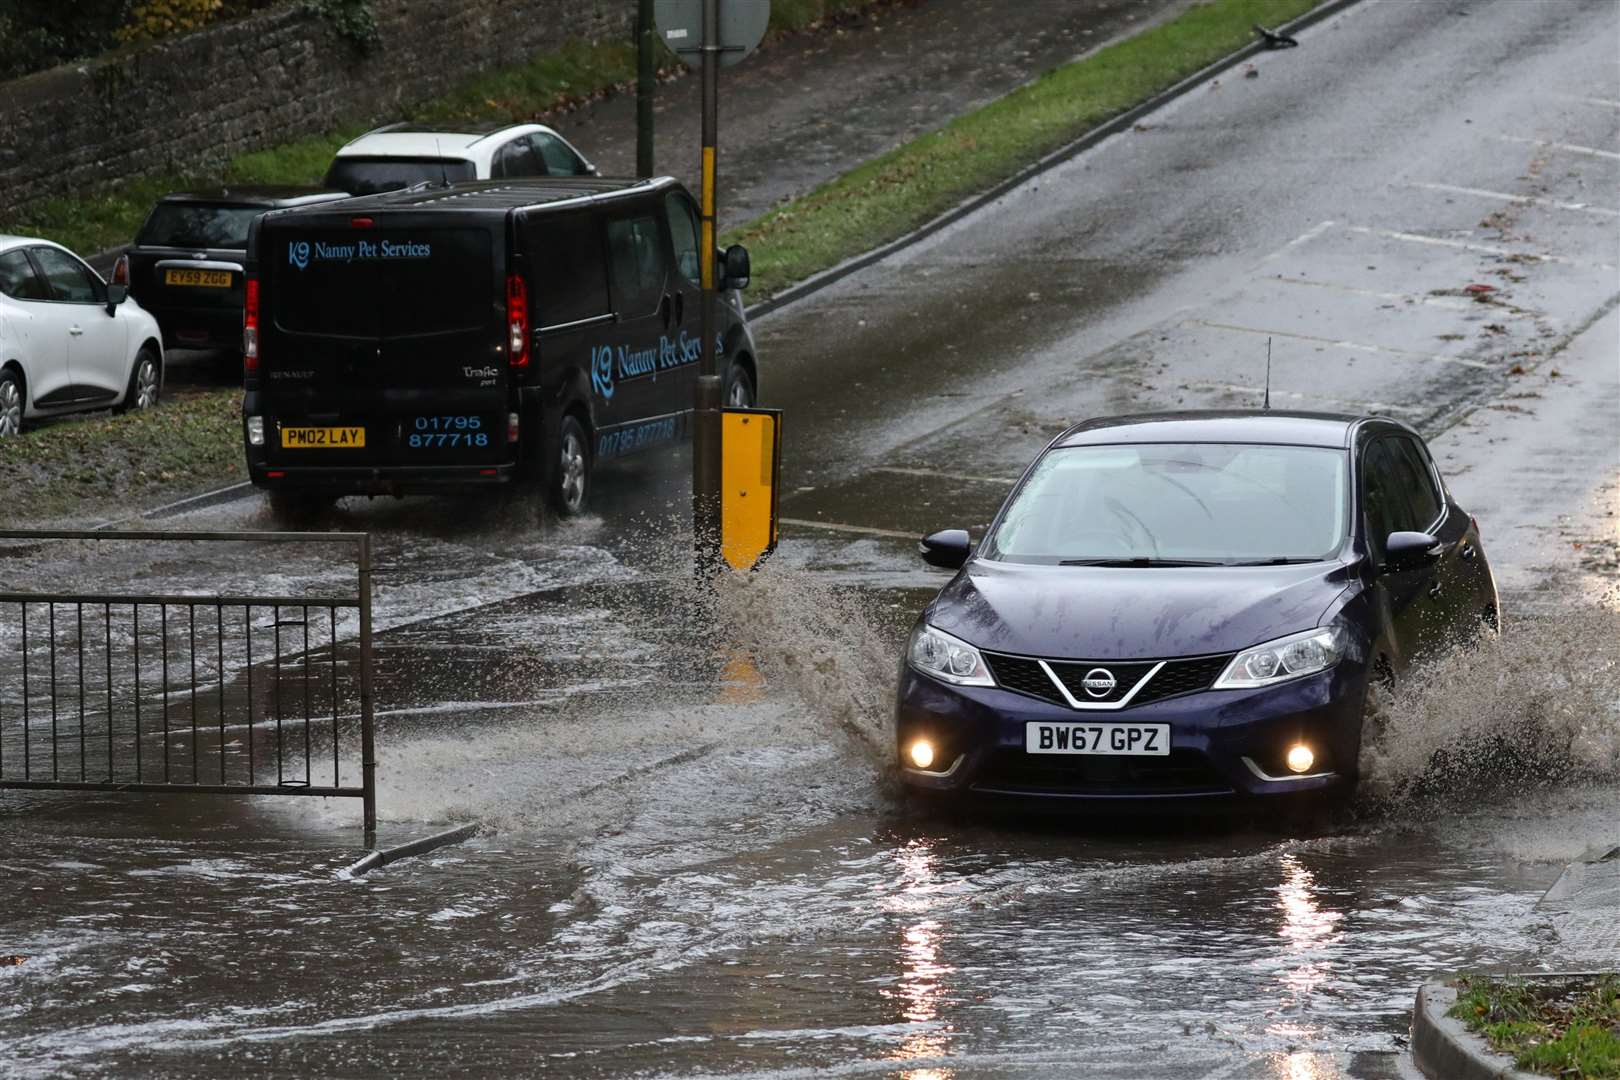 Heavy rain has caused problems for drivers. Picture: UKNiP